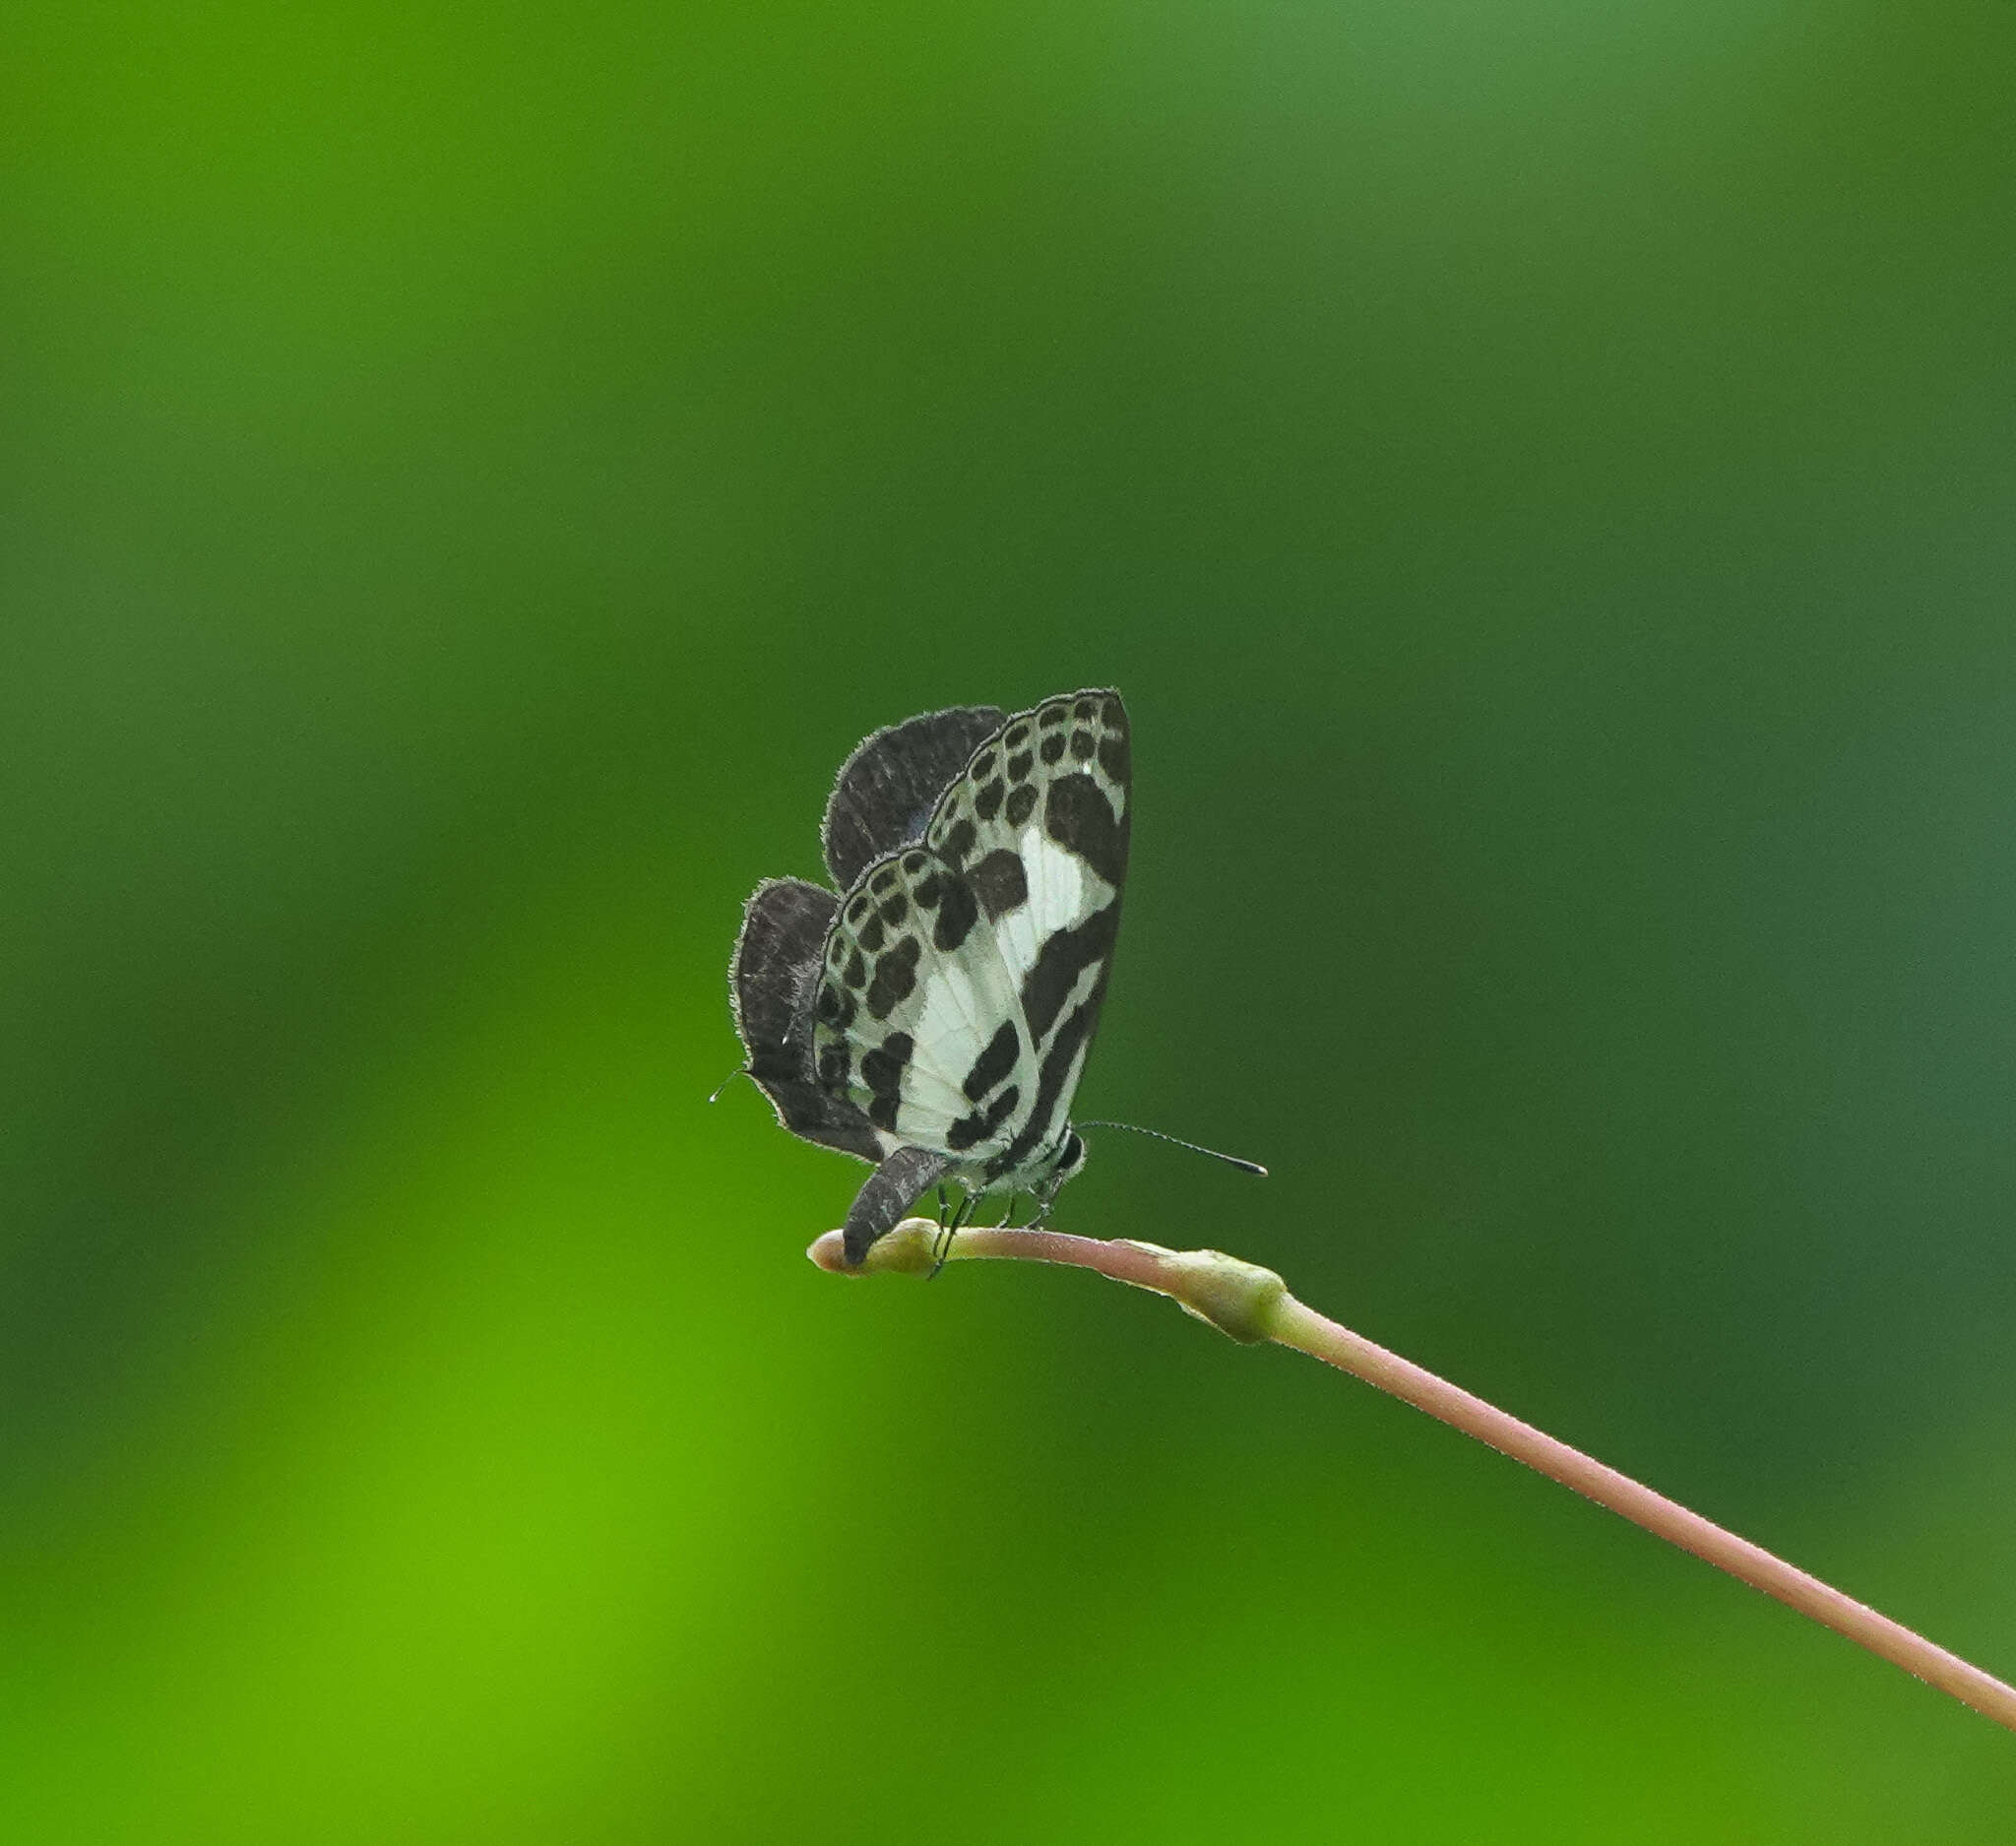 Image of banded blue Pierrot